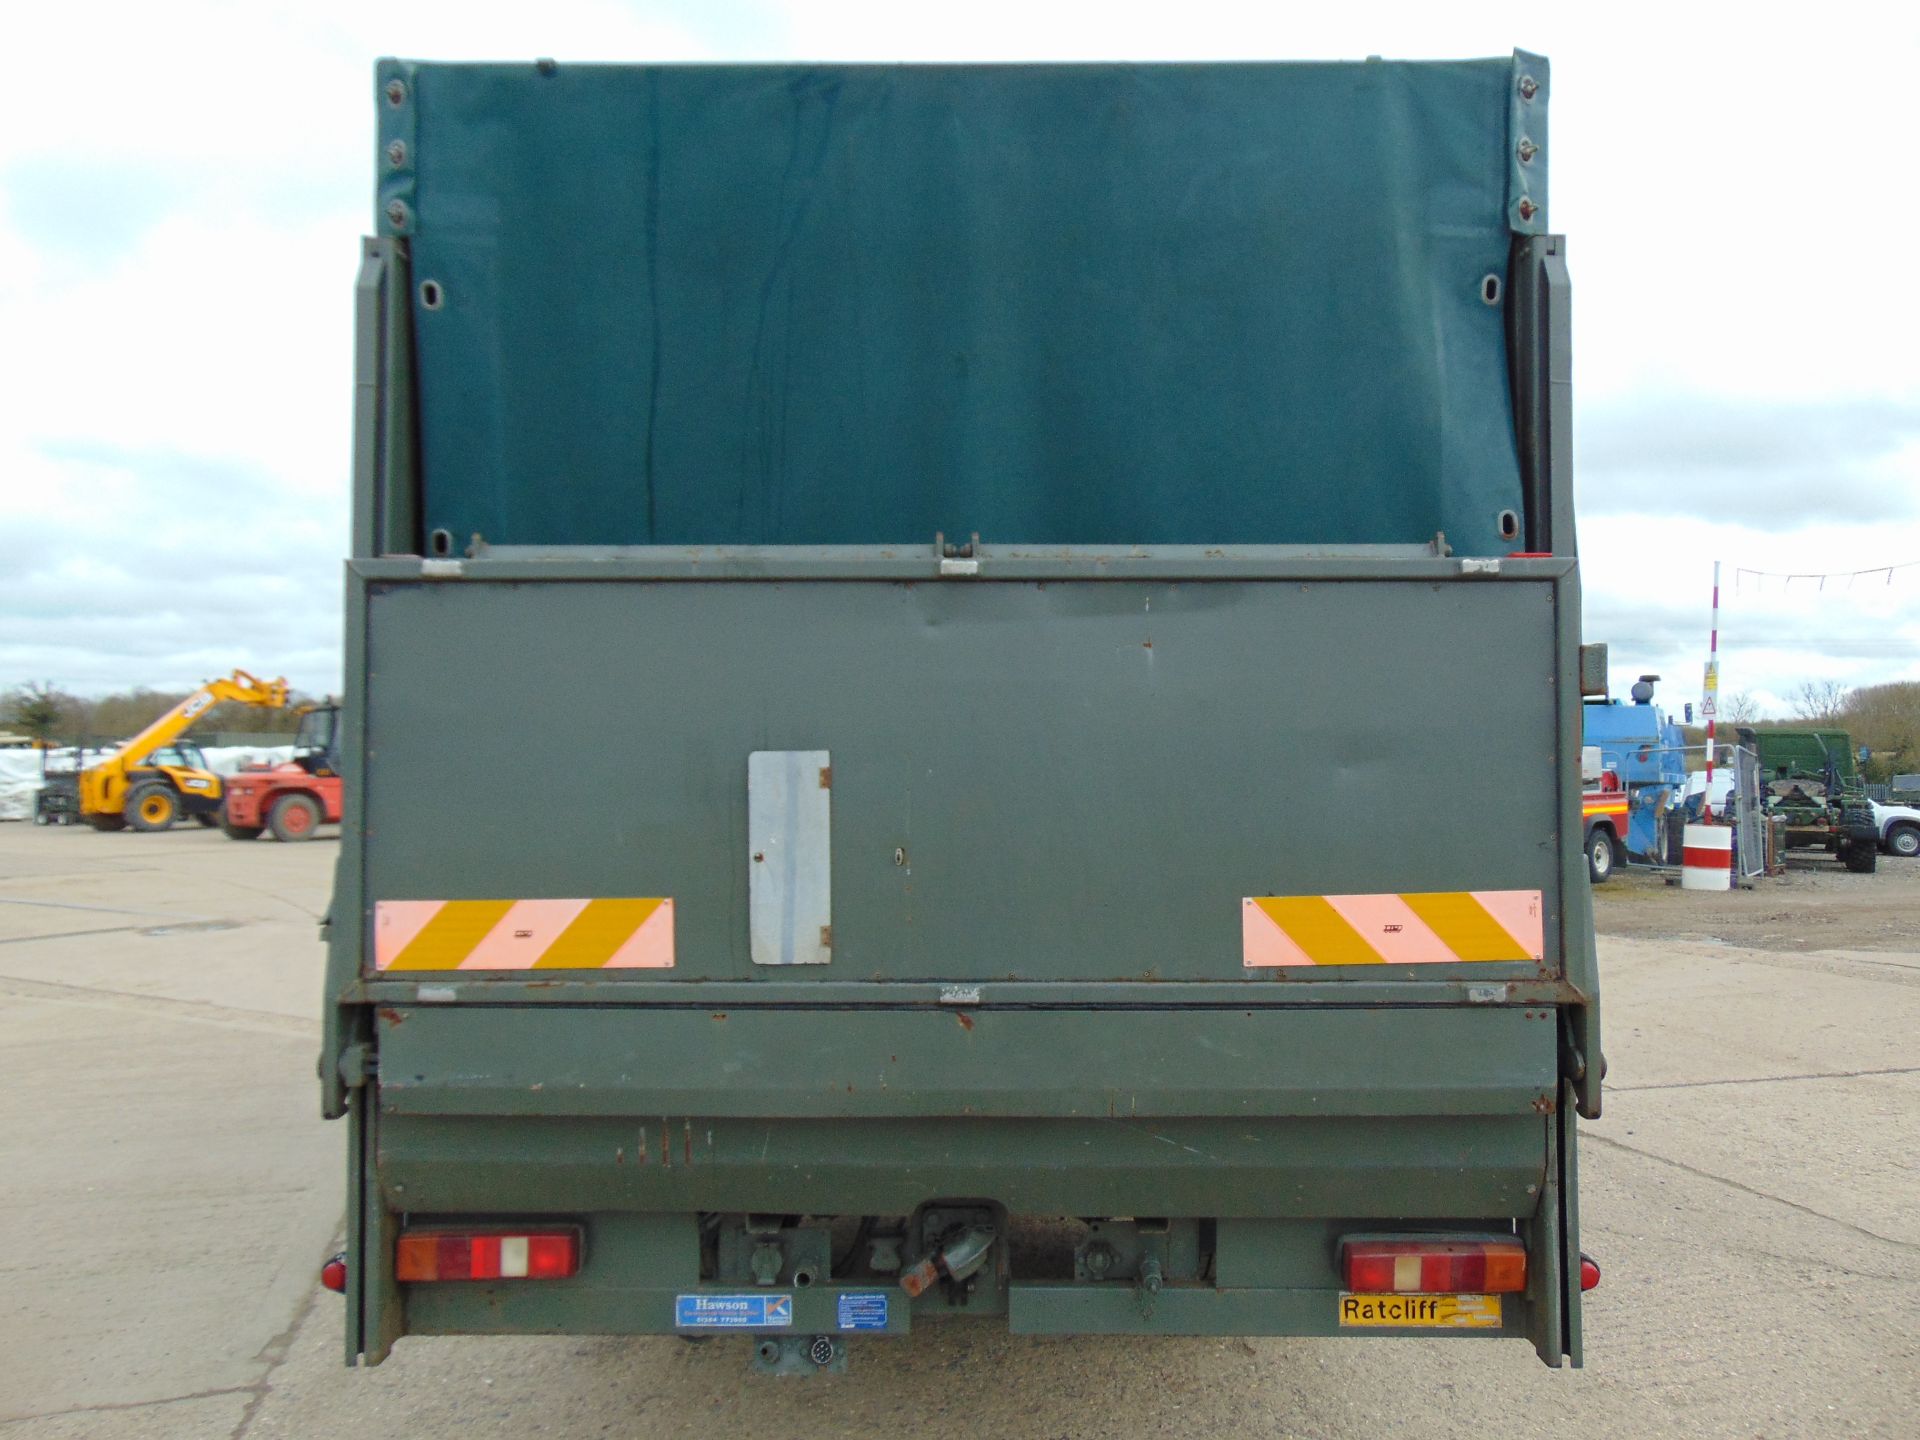 Leyland Daf 45 180Ti 4 x 2 complete with Ratcliffe Tail Lift - Image 7 of 20